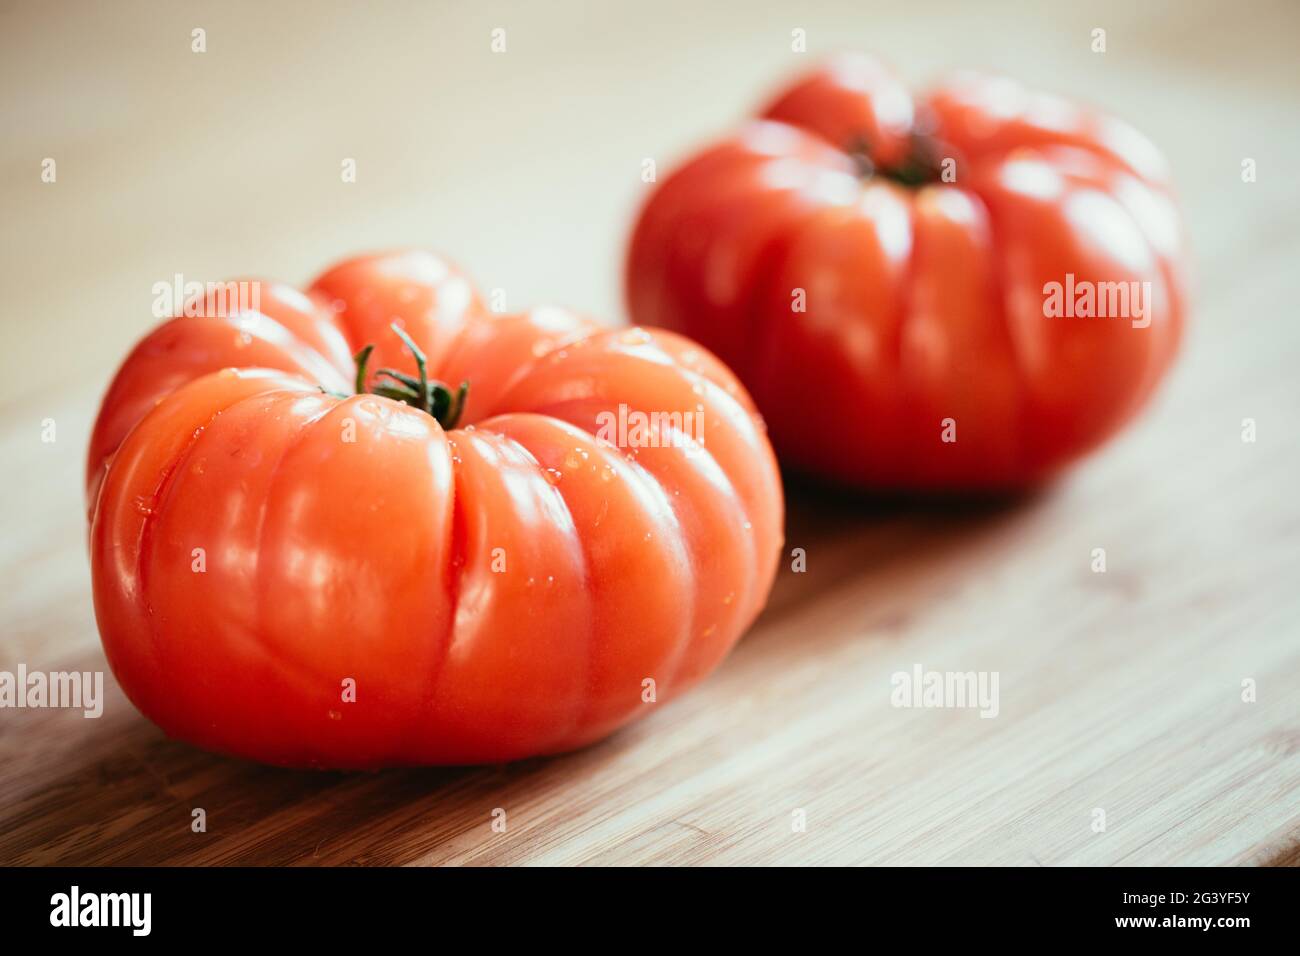 Oxheart tomatoes. Tomatoes on a bamboo wood plate. Stock Photo